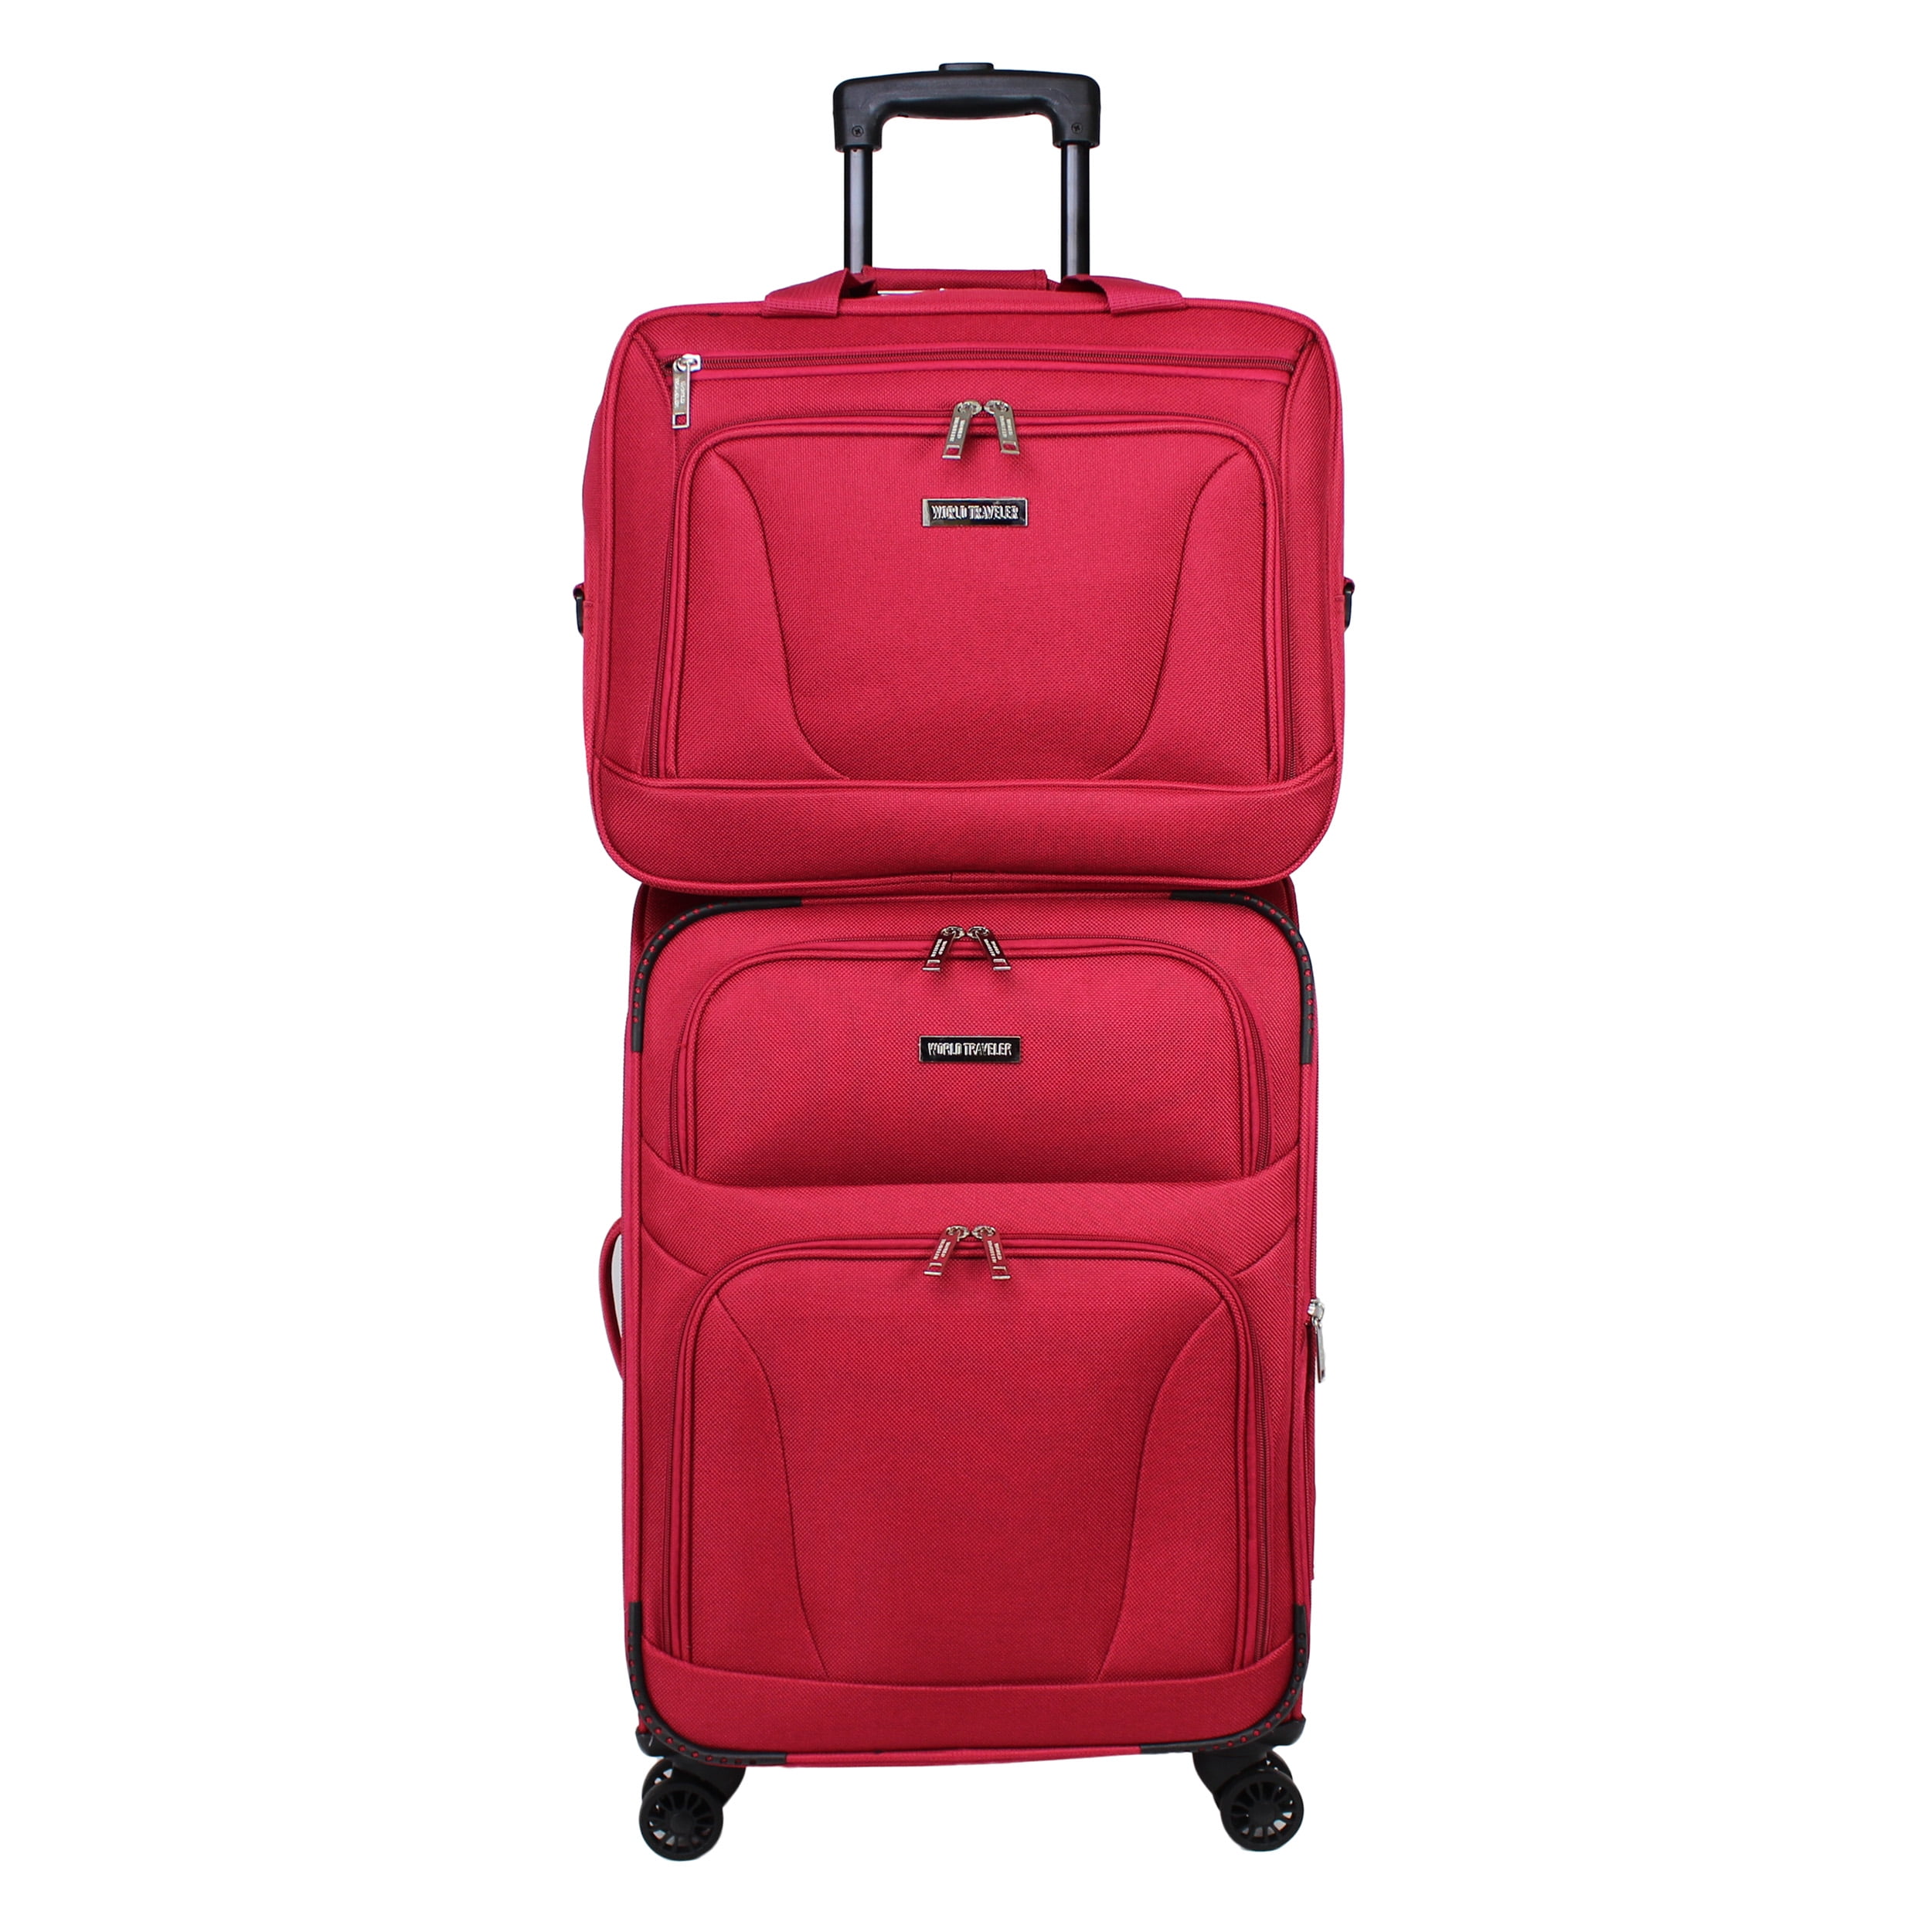 World Traveler Embarque Collection Lightweight 2-PC Carry-On 